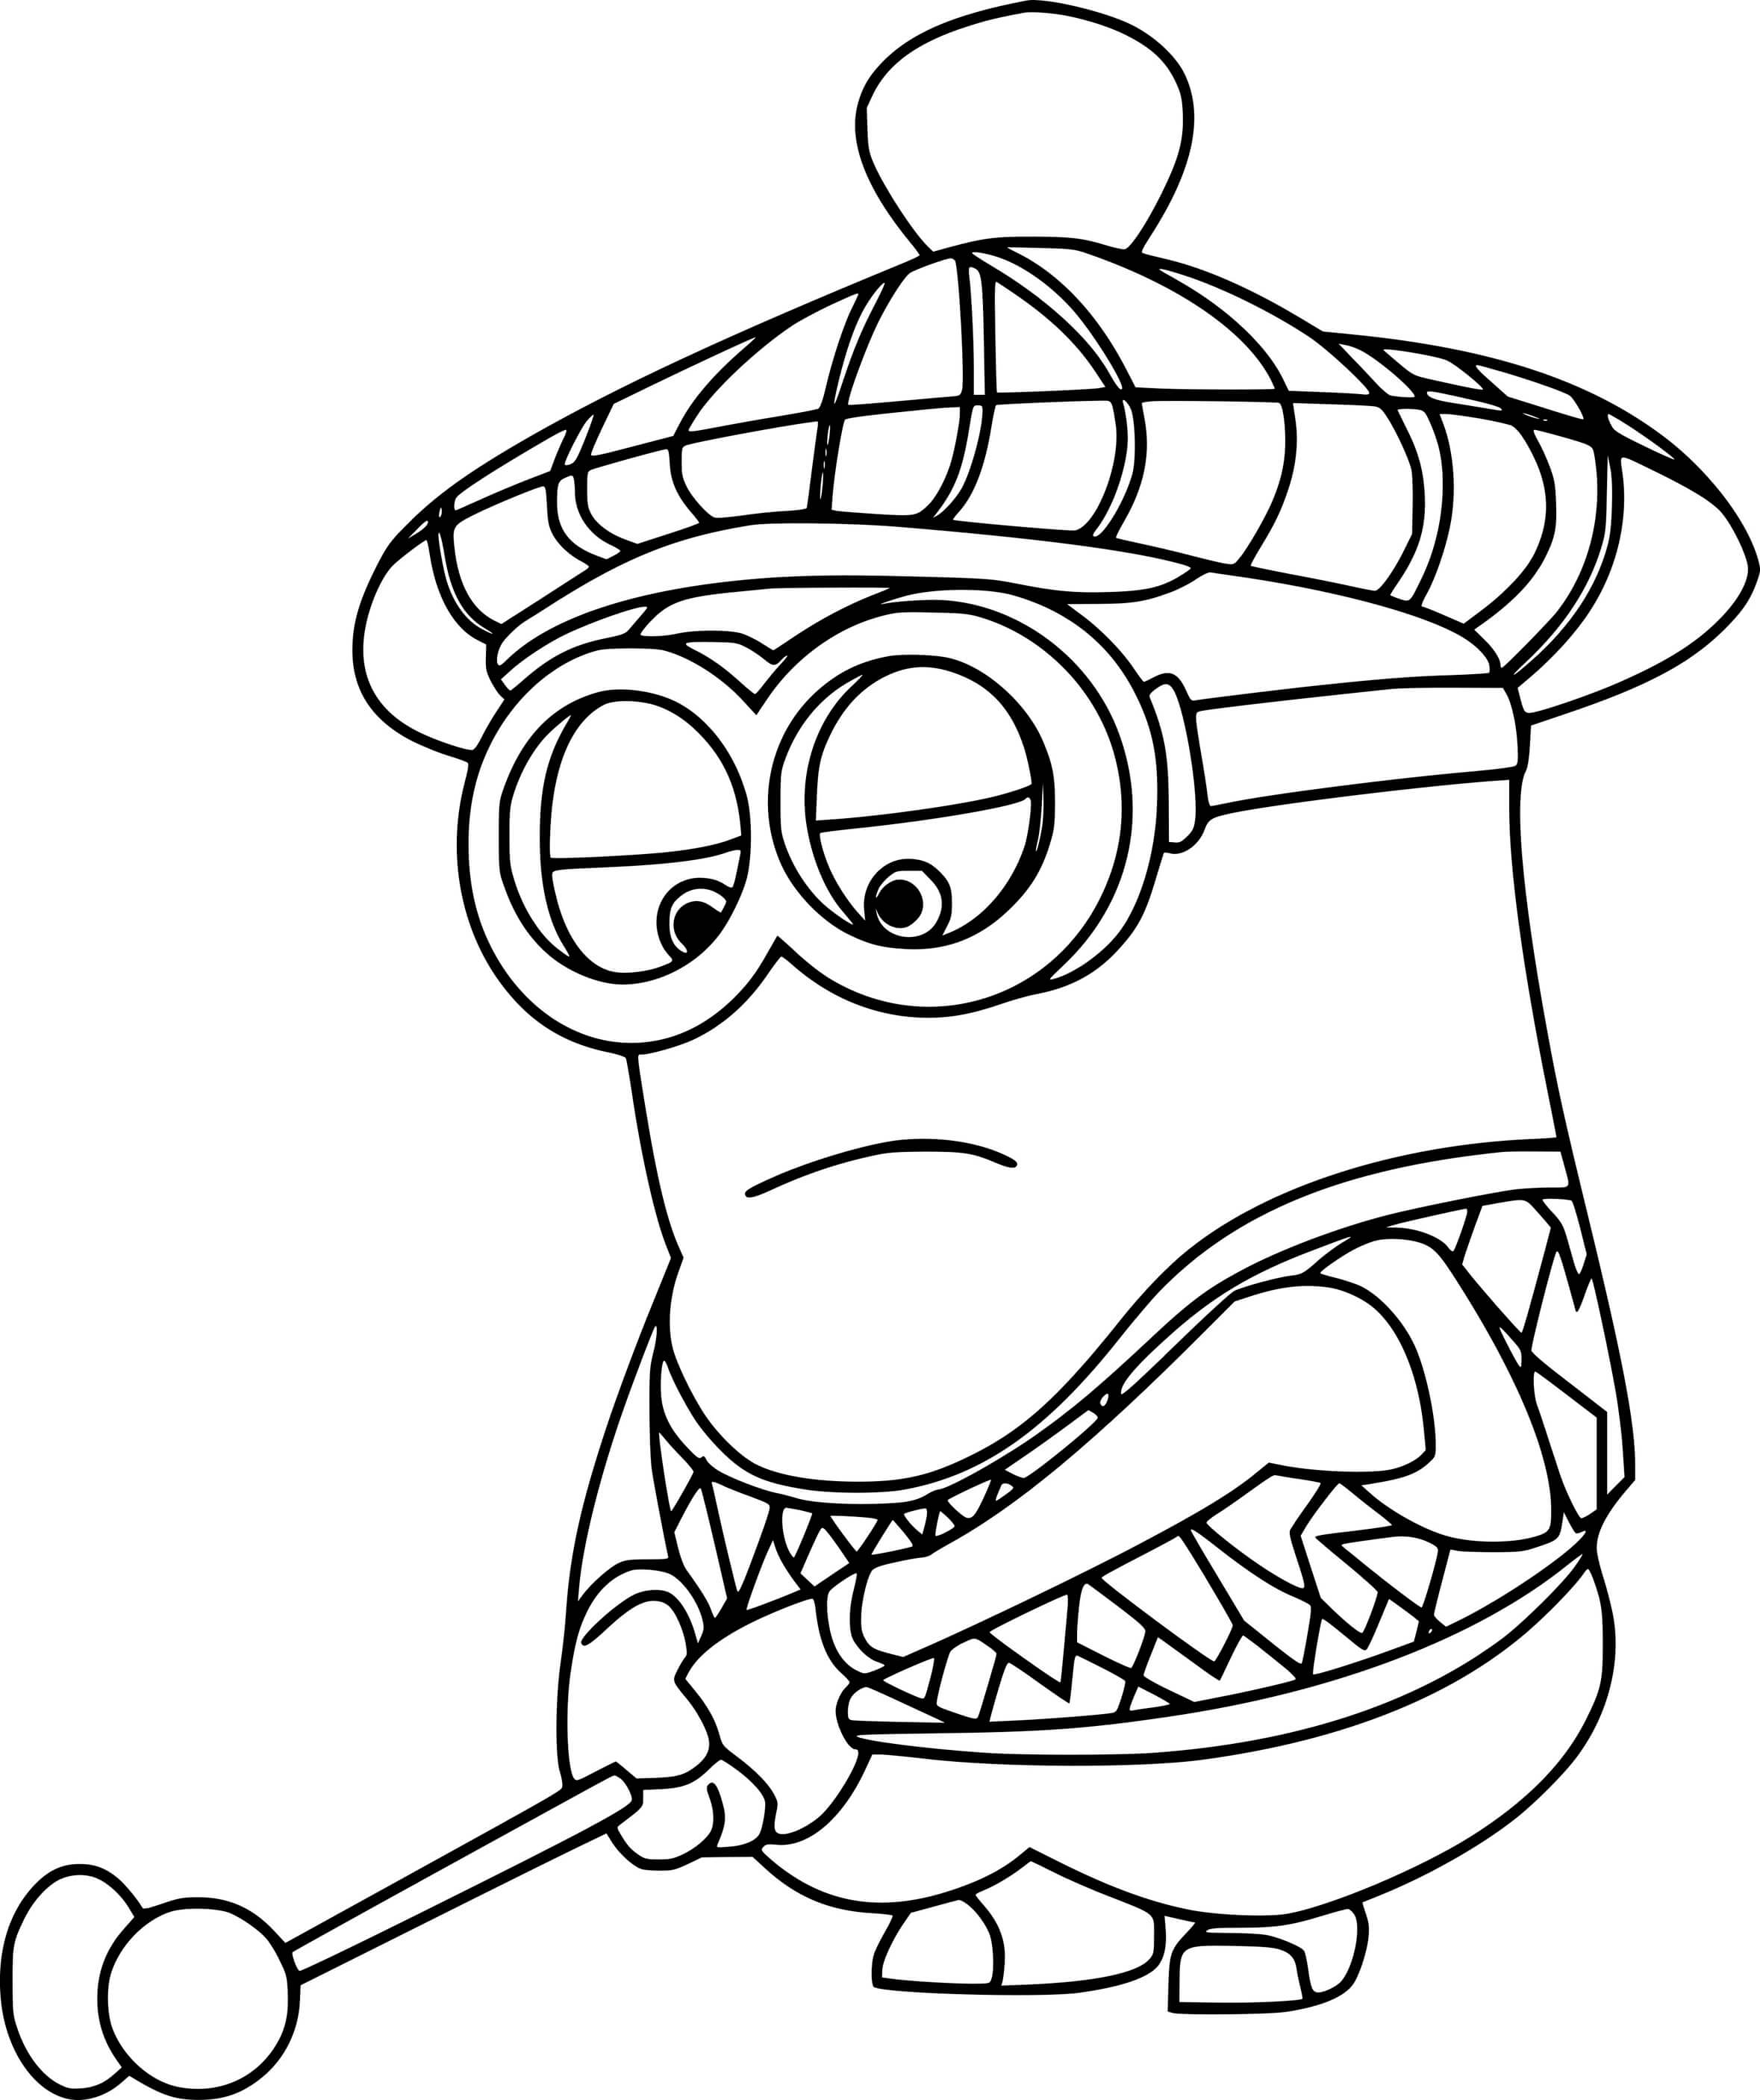 Kevin Playing Golf Coloring Page